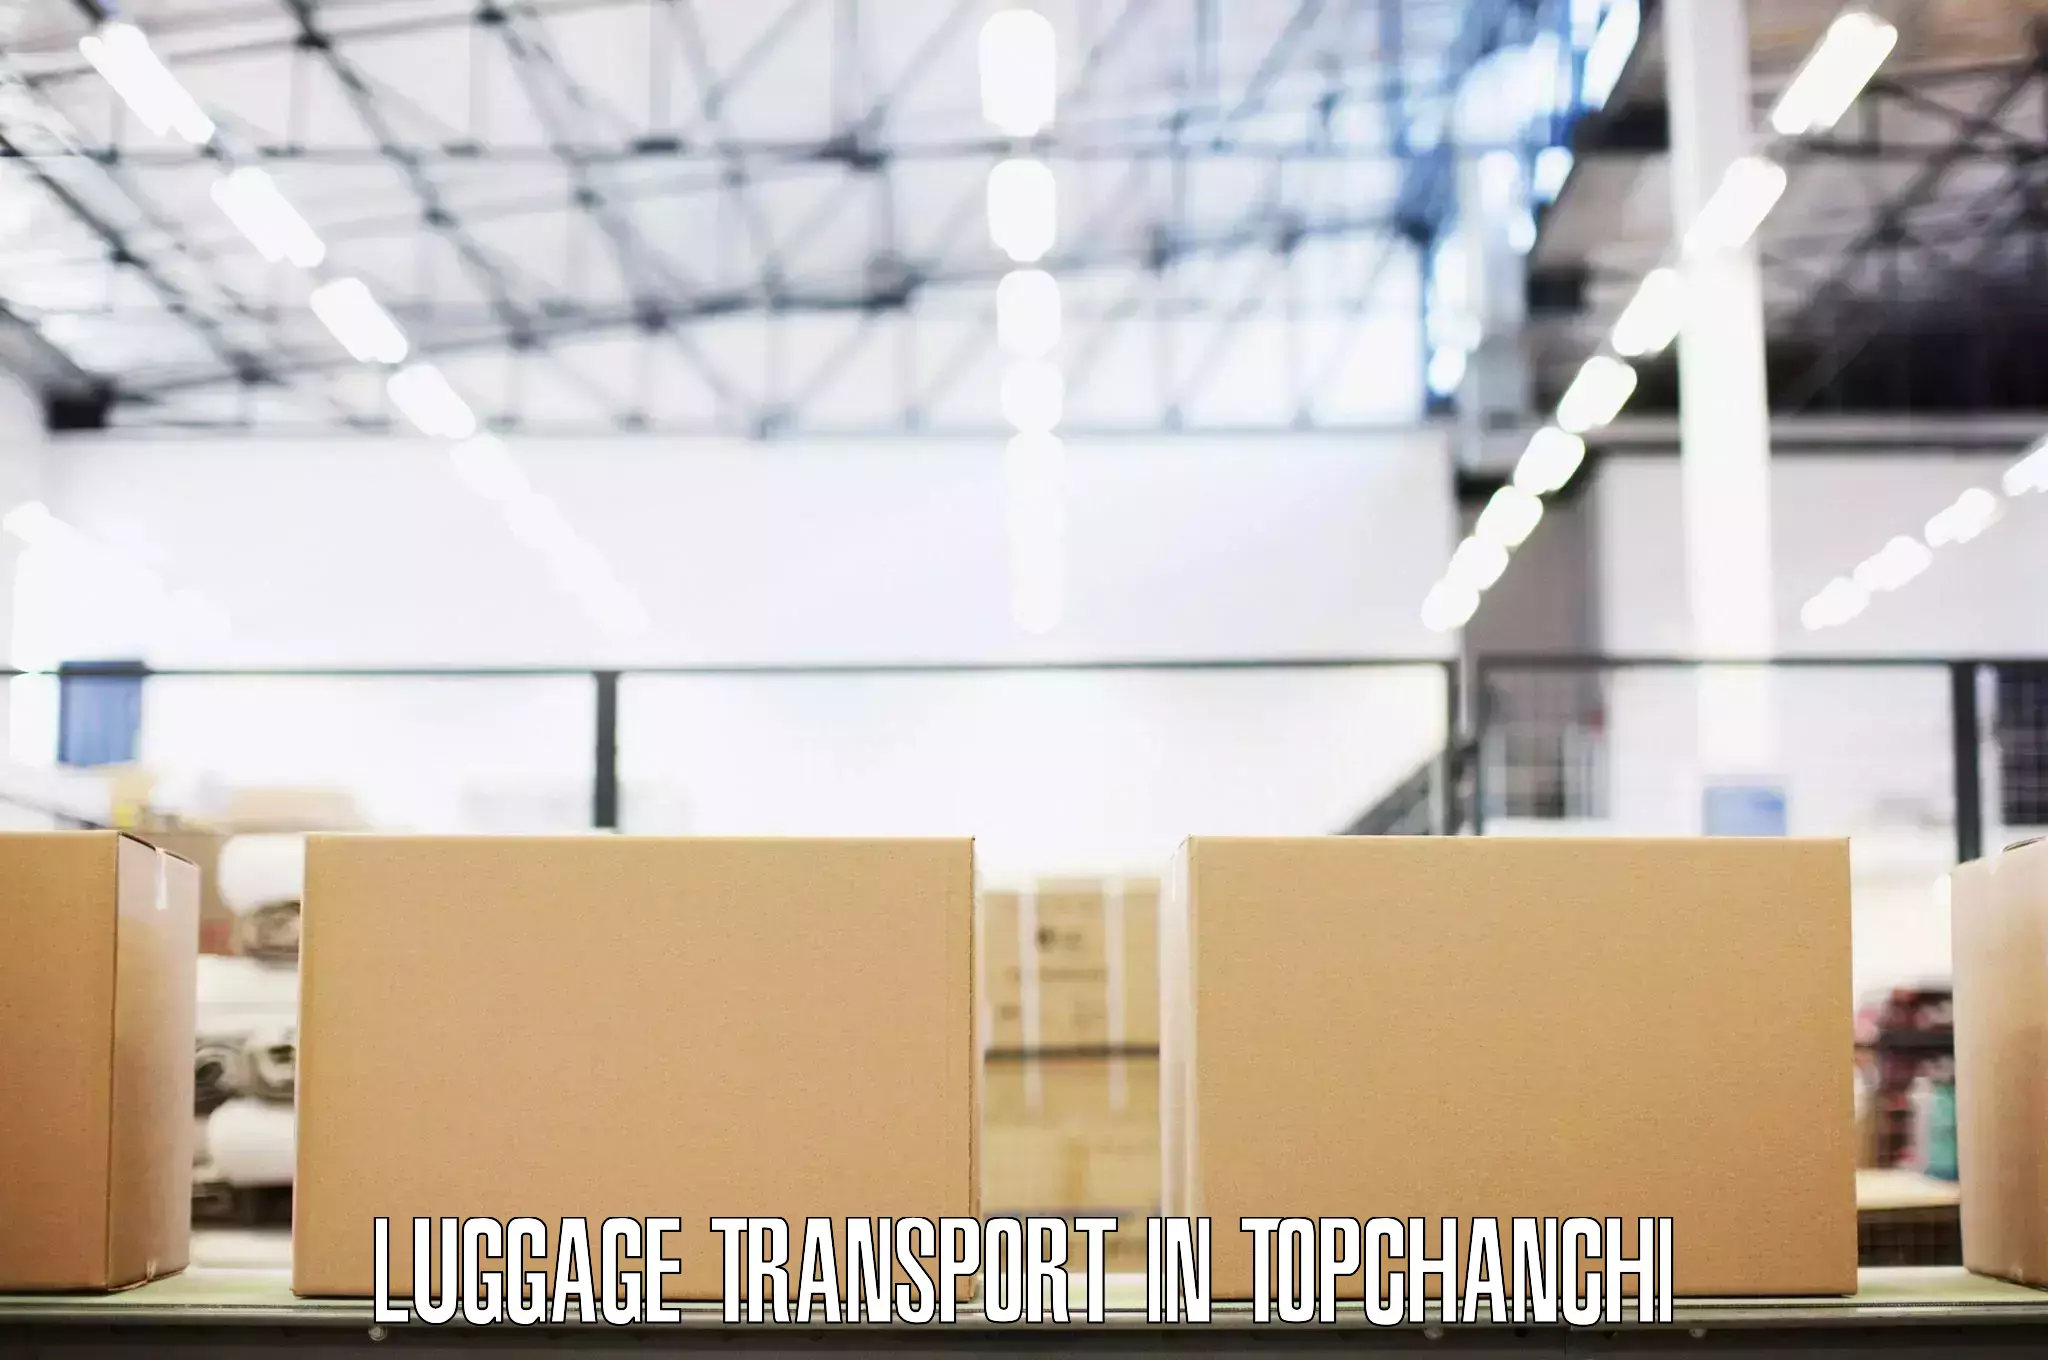 Discounted baggage transport in Topchanchi